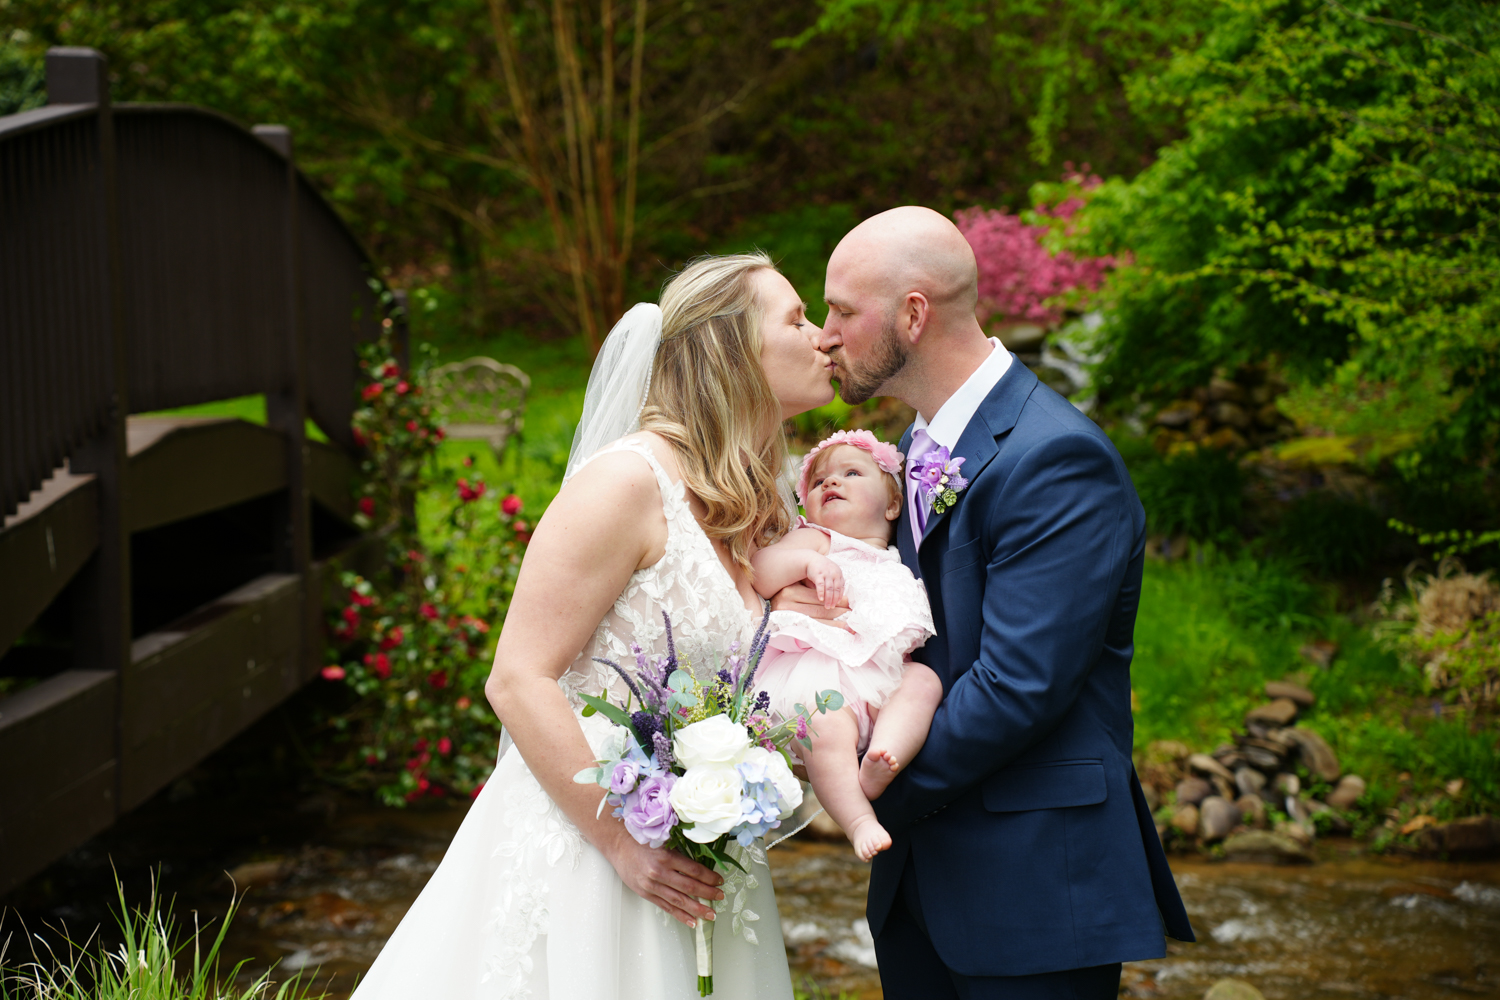 Bride and groom kissing while holding their baby girl who is looking up at them